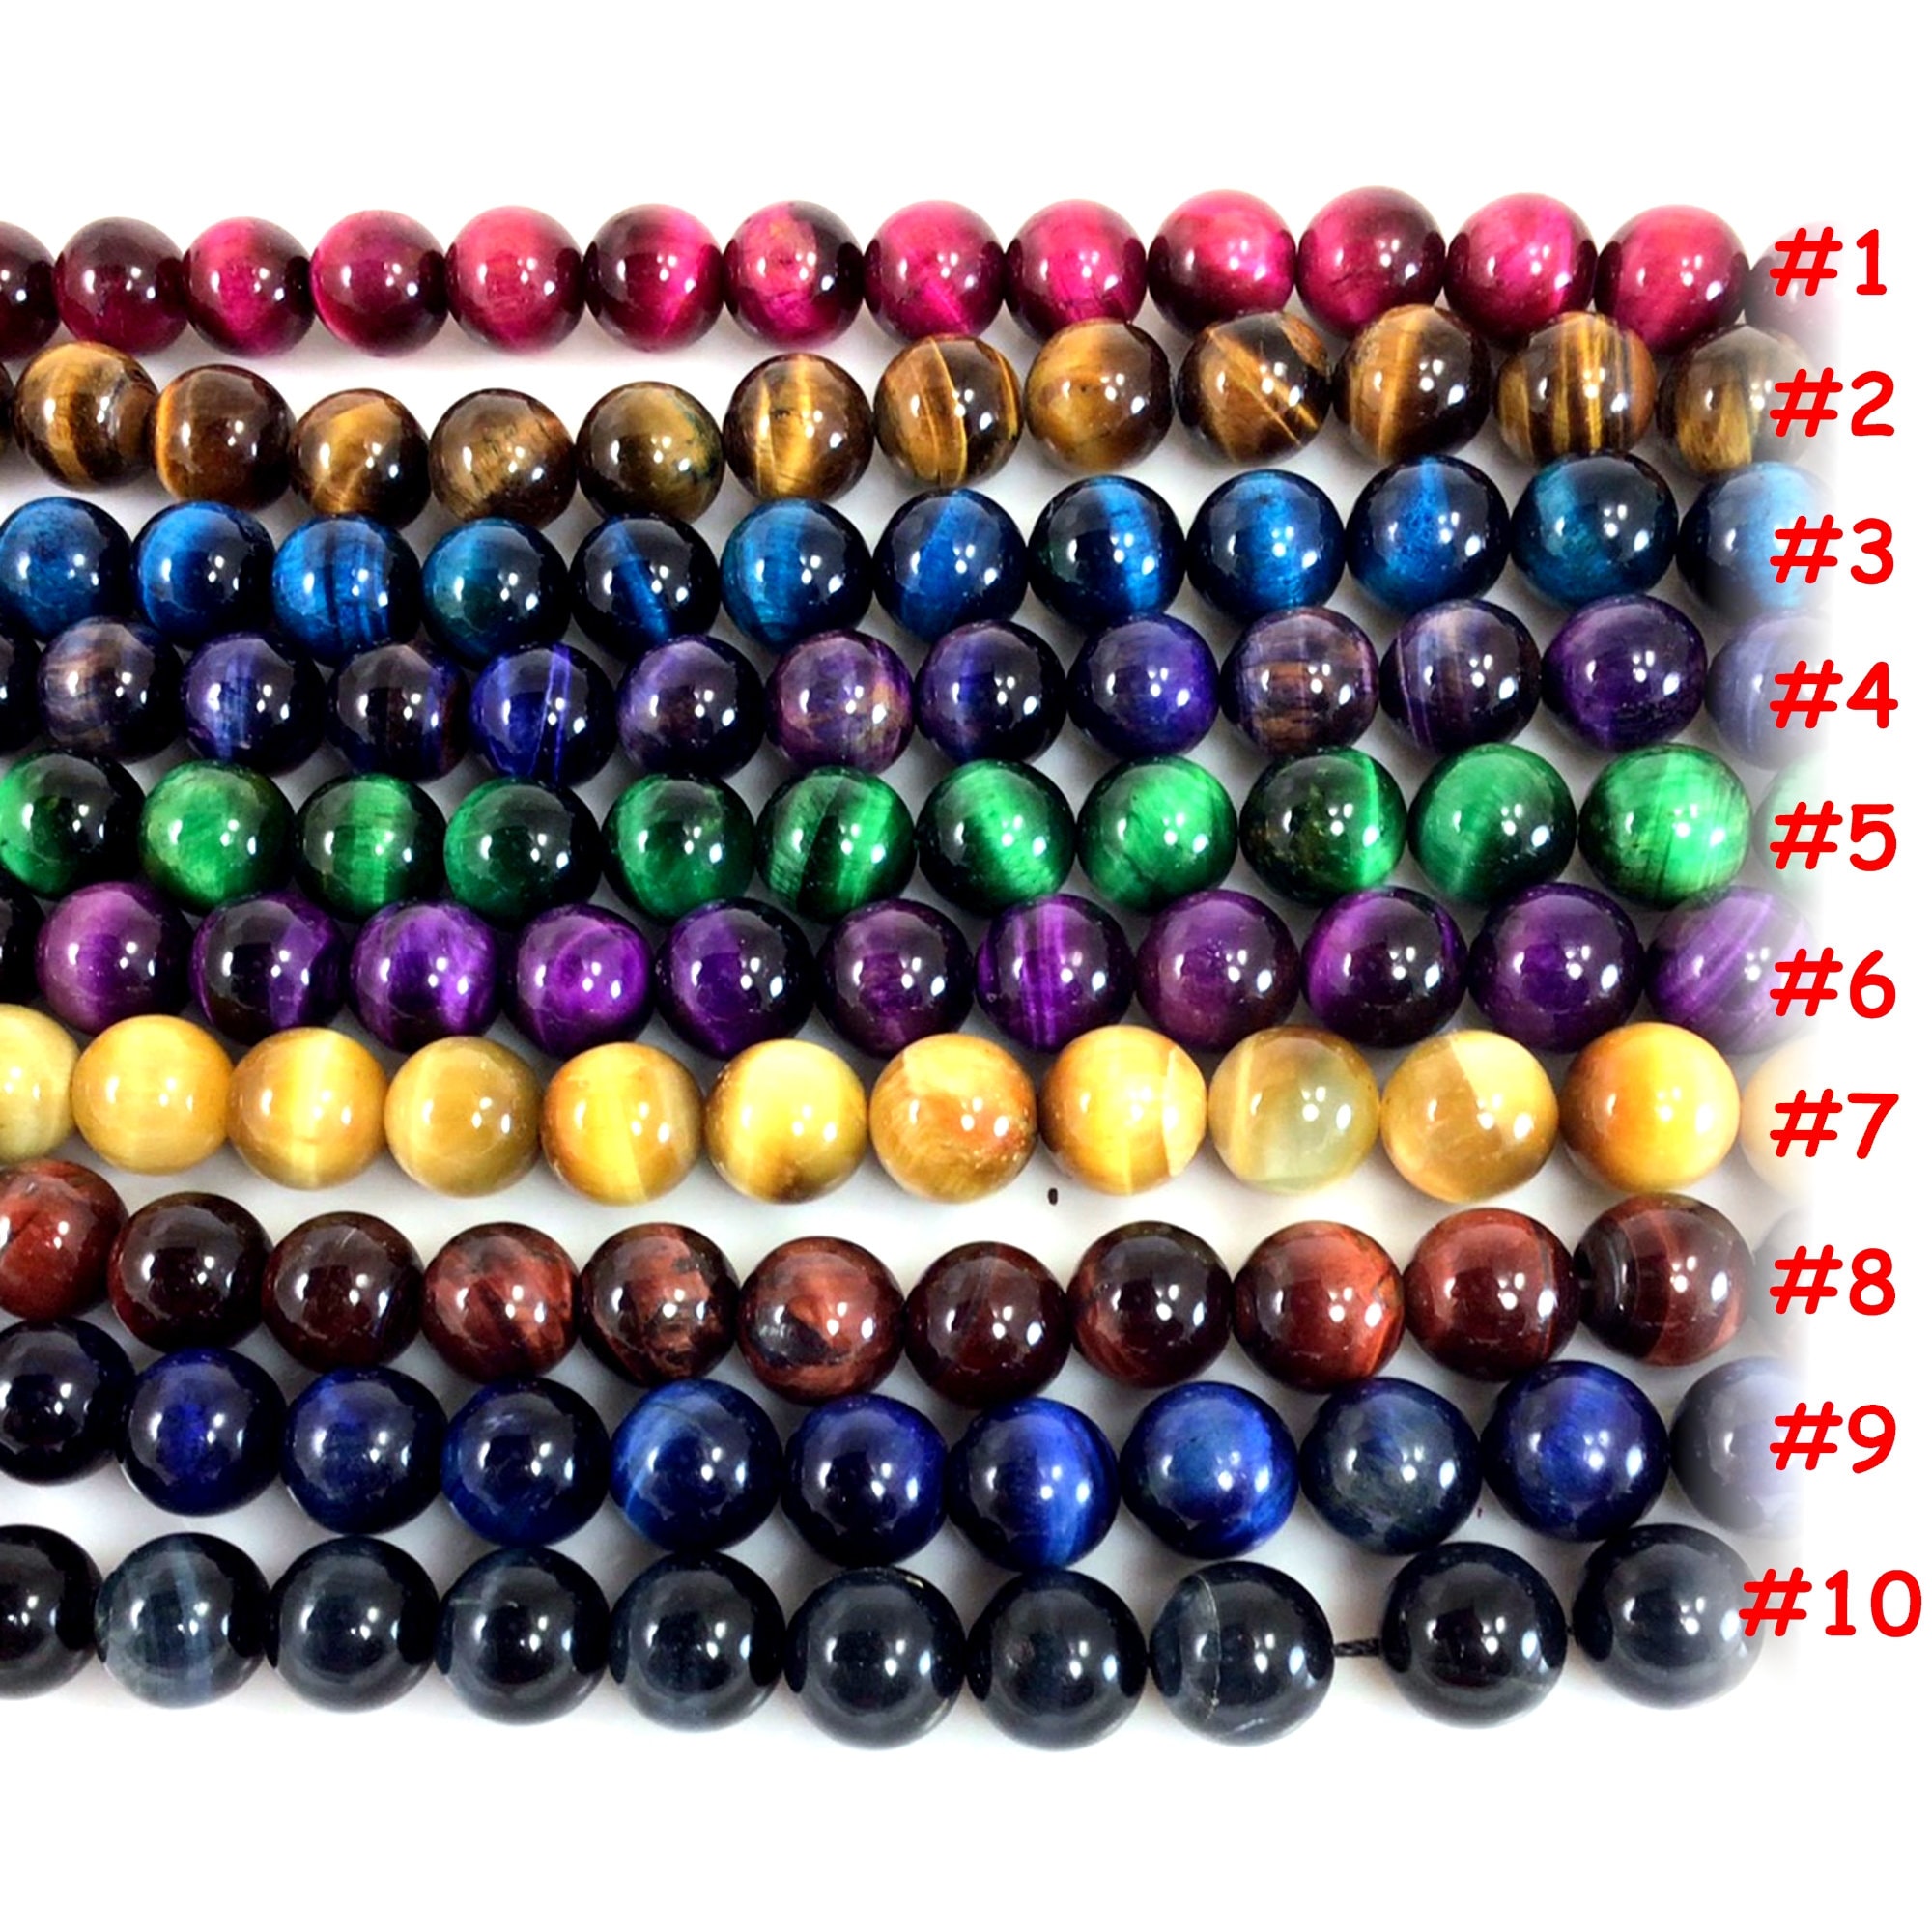 Factory Price Natural Tiger Eye Stones Loose Round Beads For Jewelry Making  6-10 MM DIY